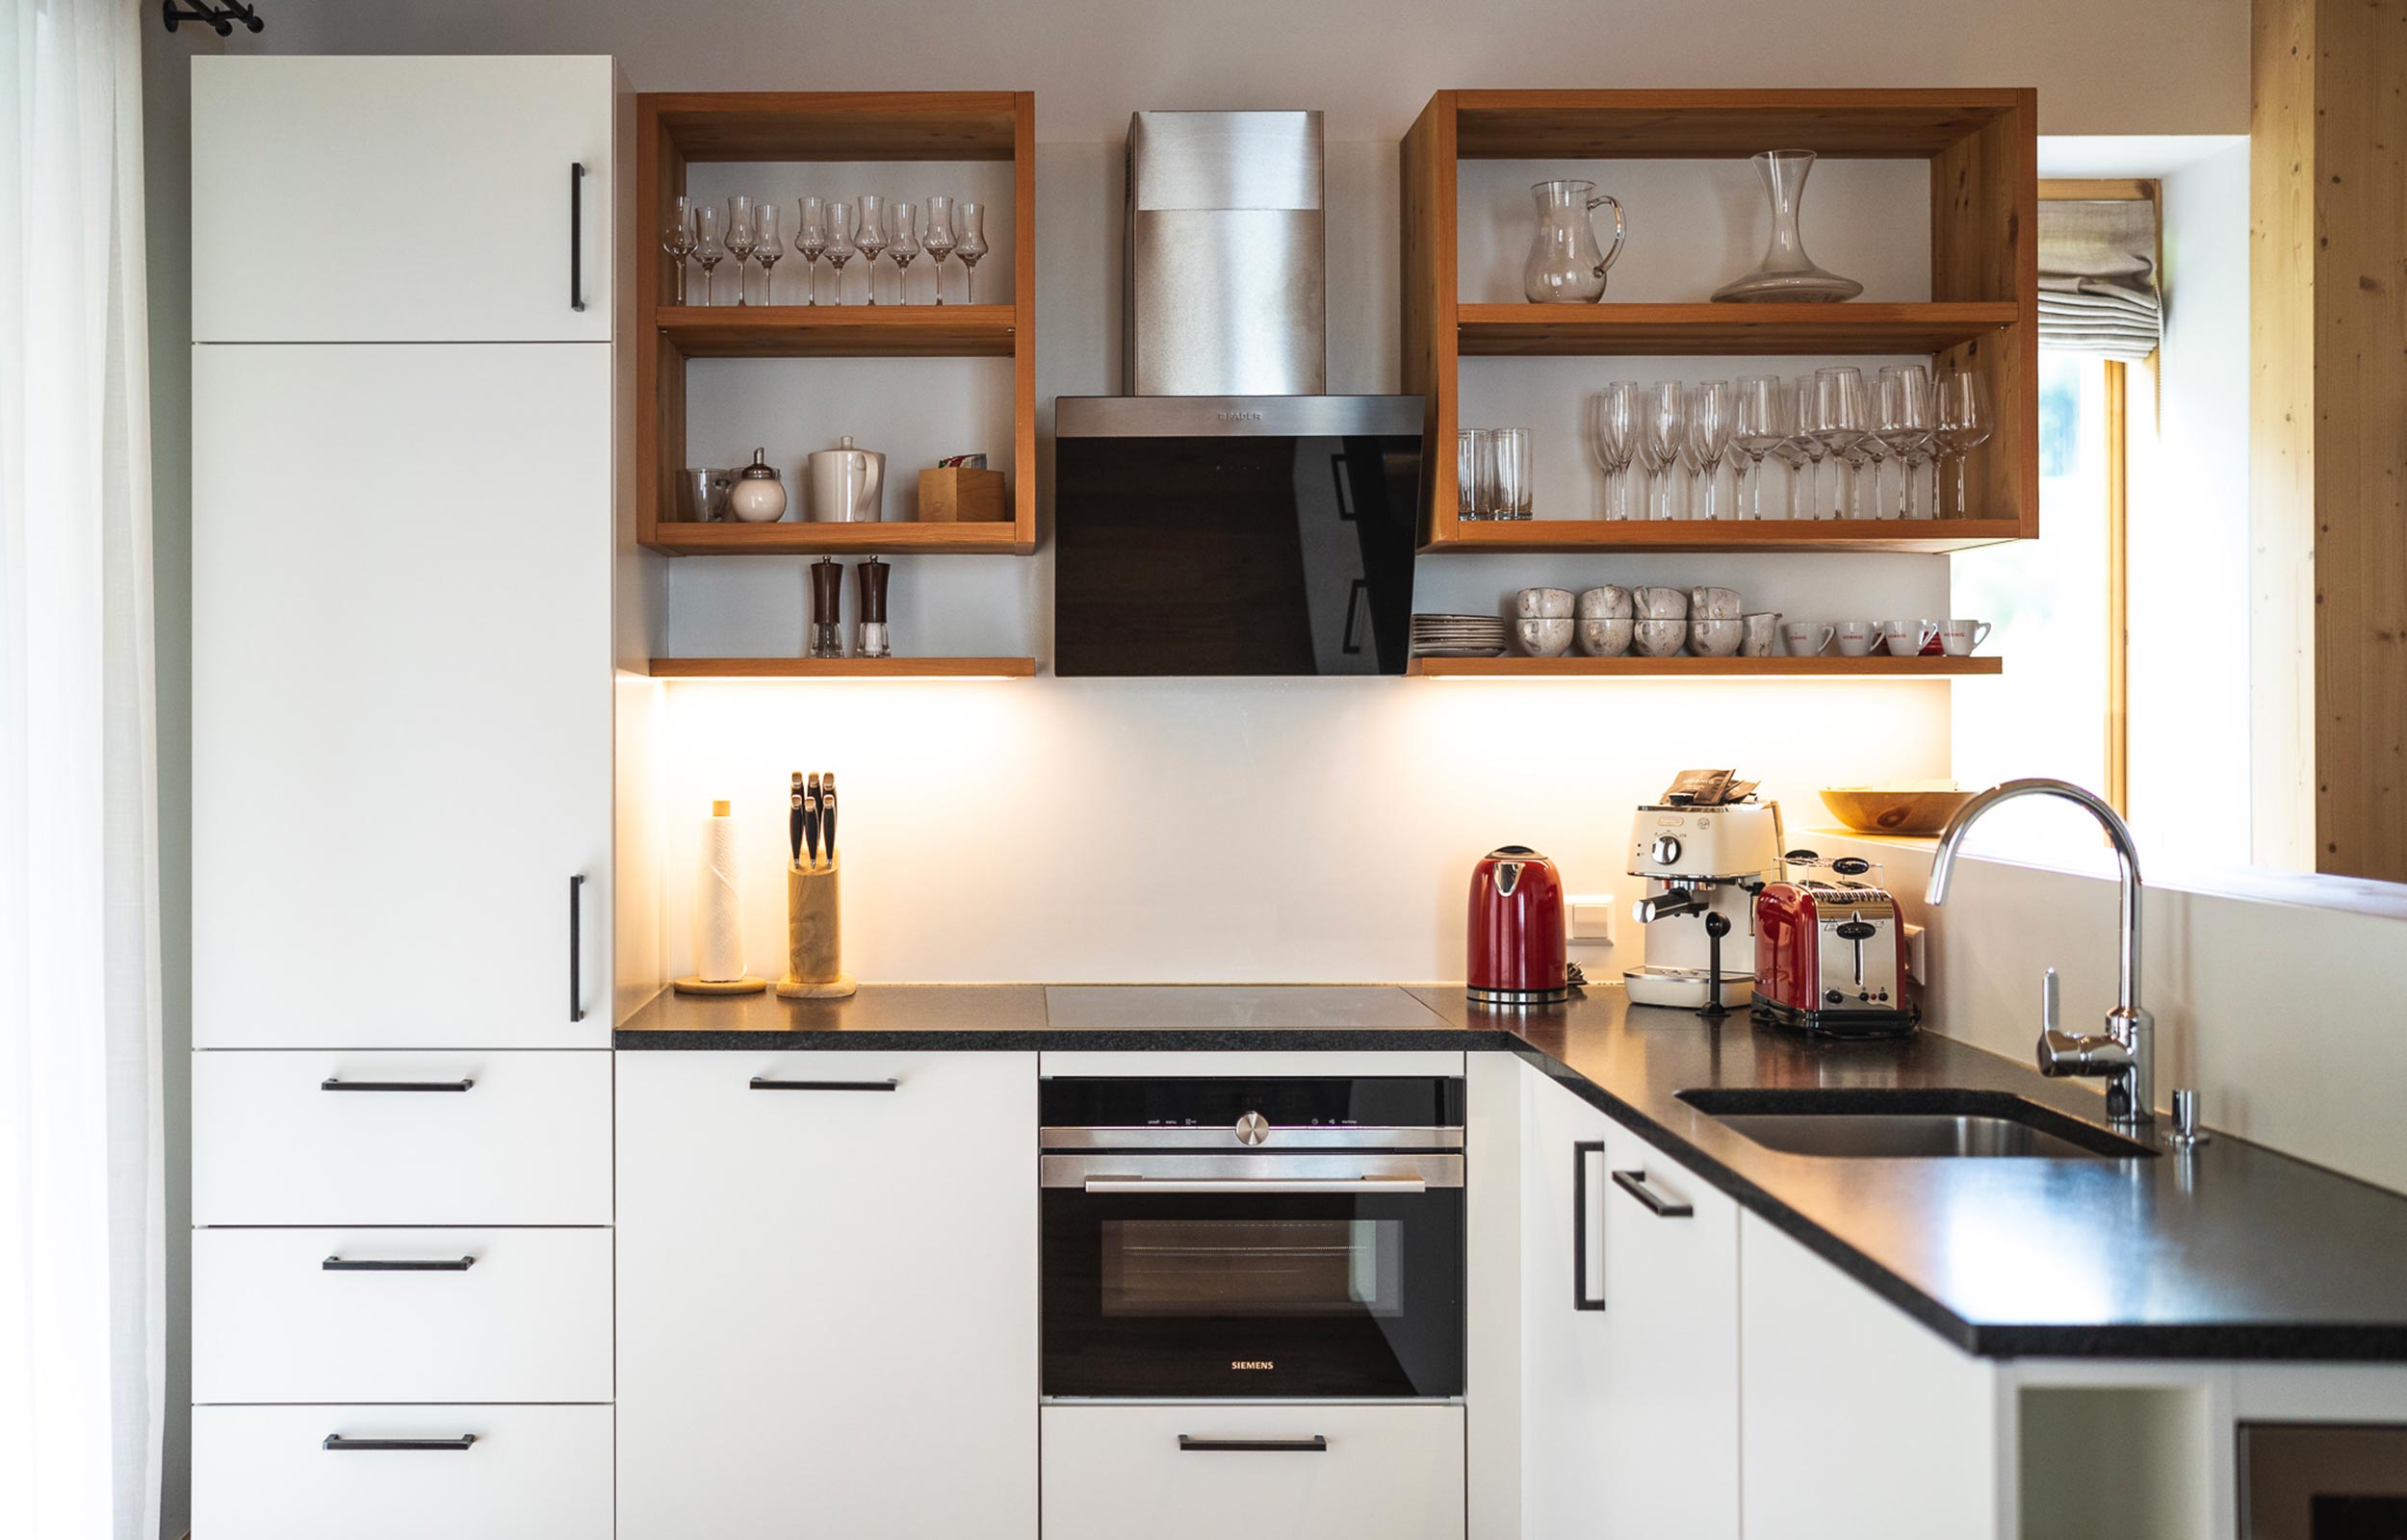 A modern fully equipped kitchen at Trattlers Hof - Chalets in Carinthia.